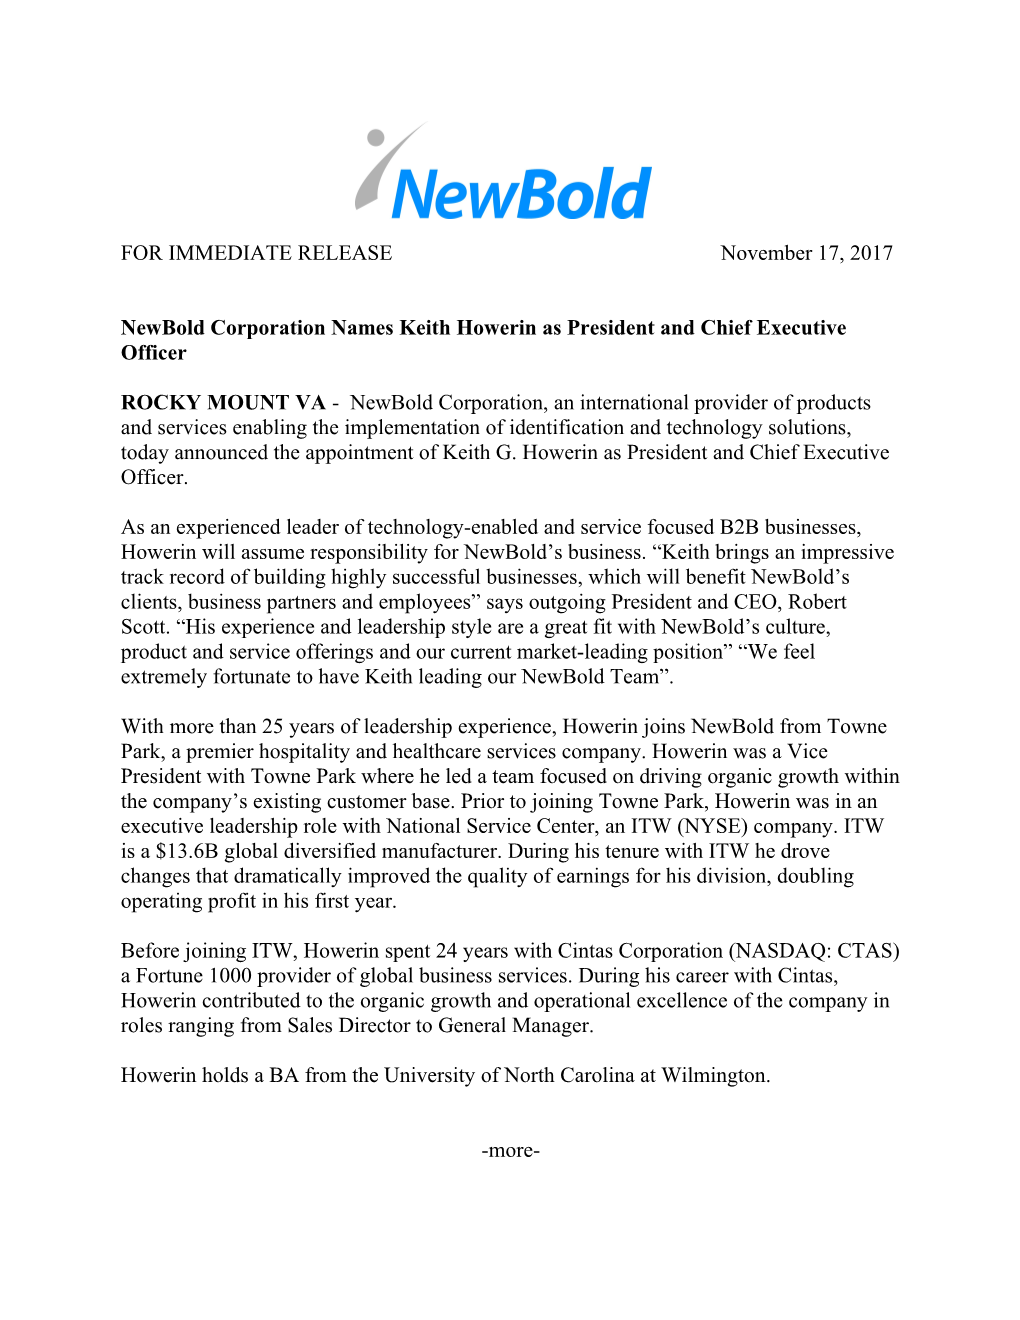 Newbold Corporation Names Keith Howerin As President and Chief Executive Officer